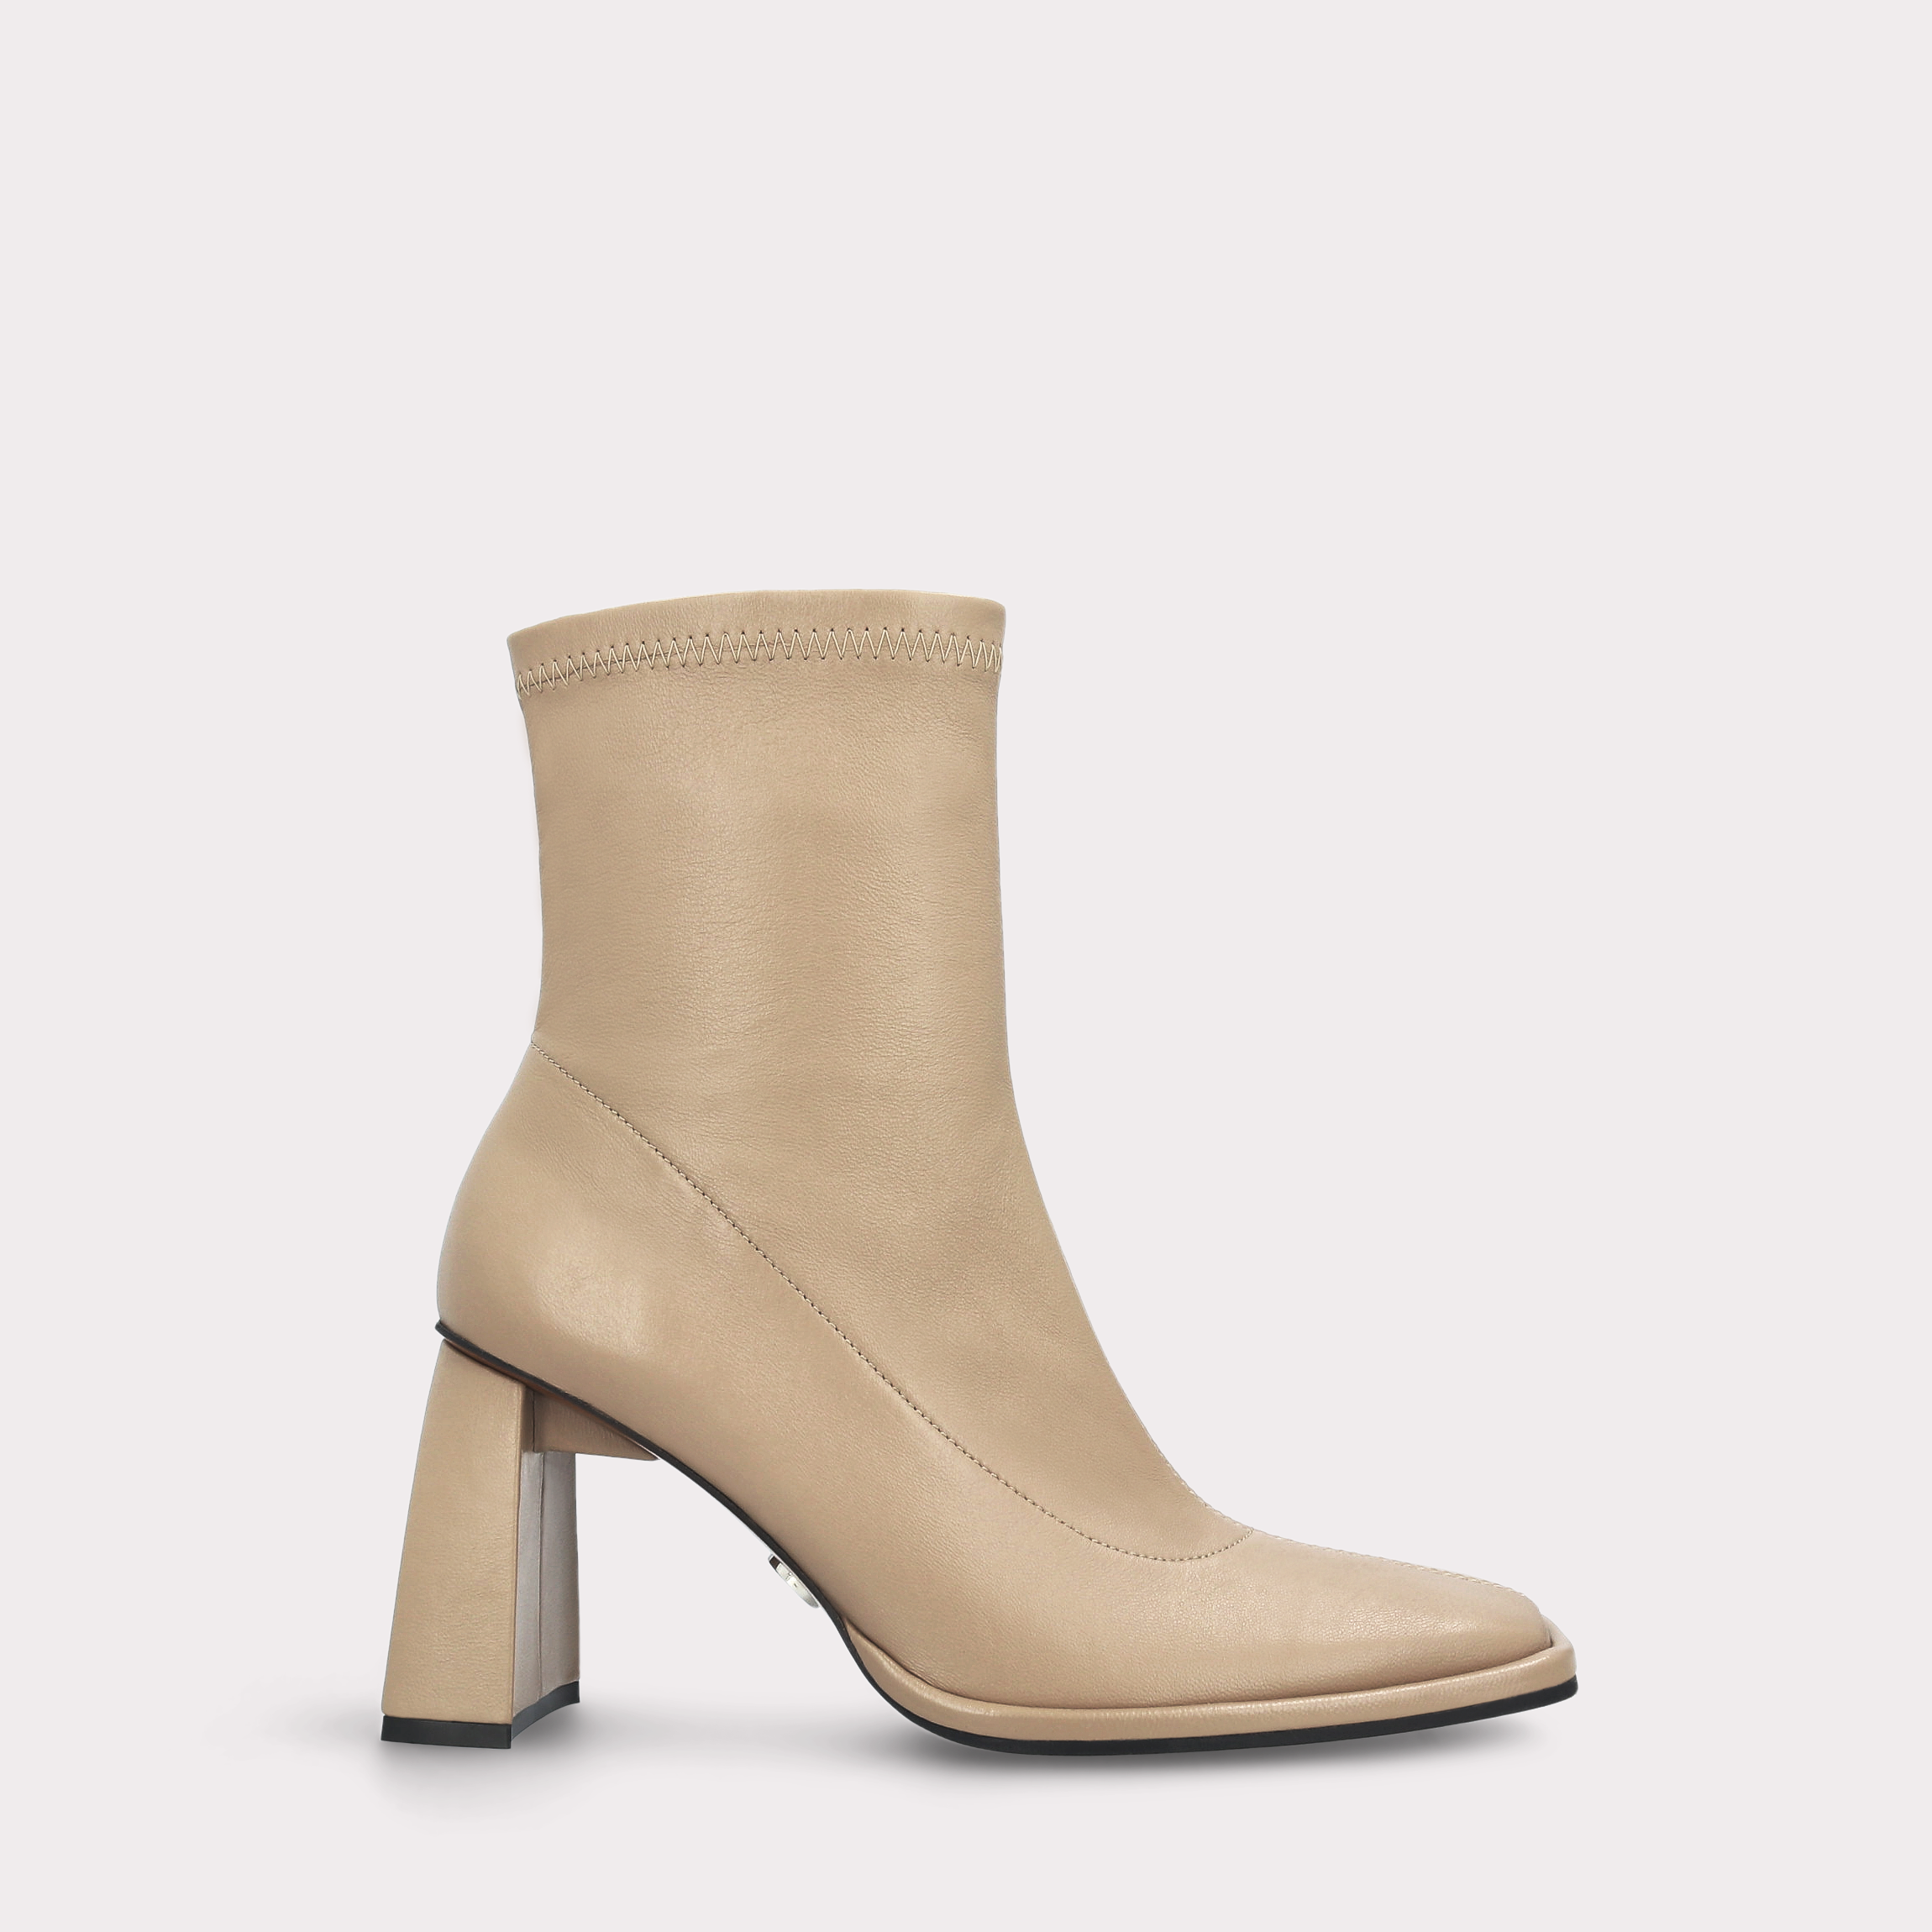 BRENTA 01 NUDE STRETCH LEATHER ANKLE BOOTS